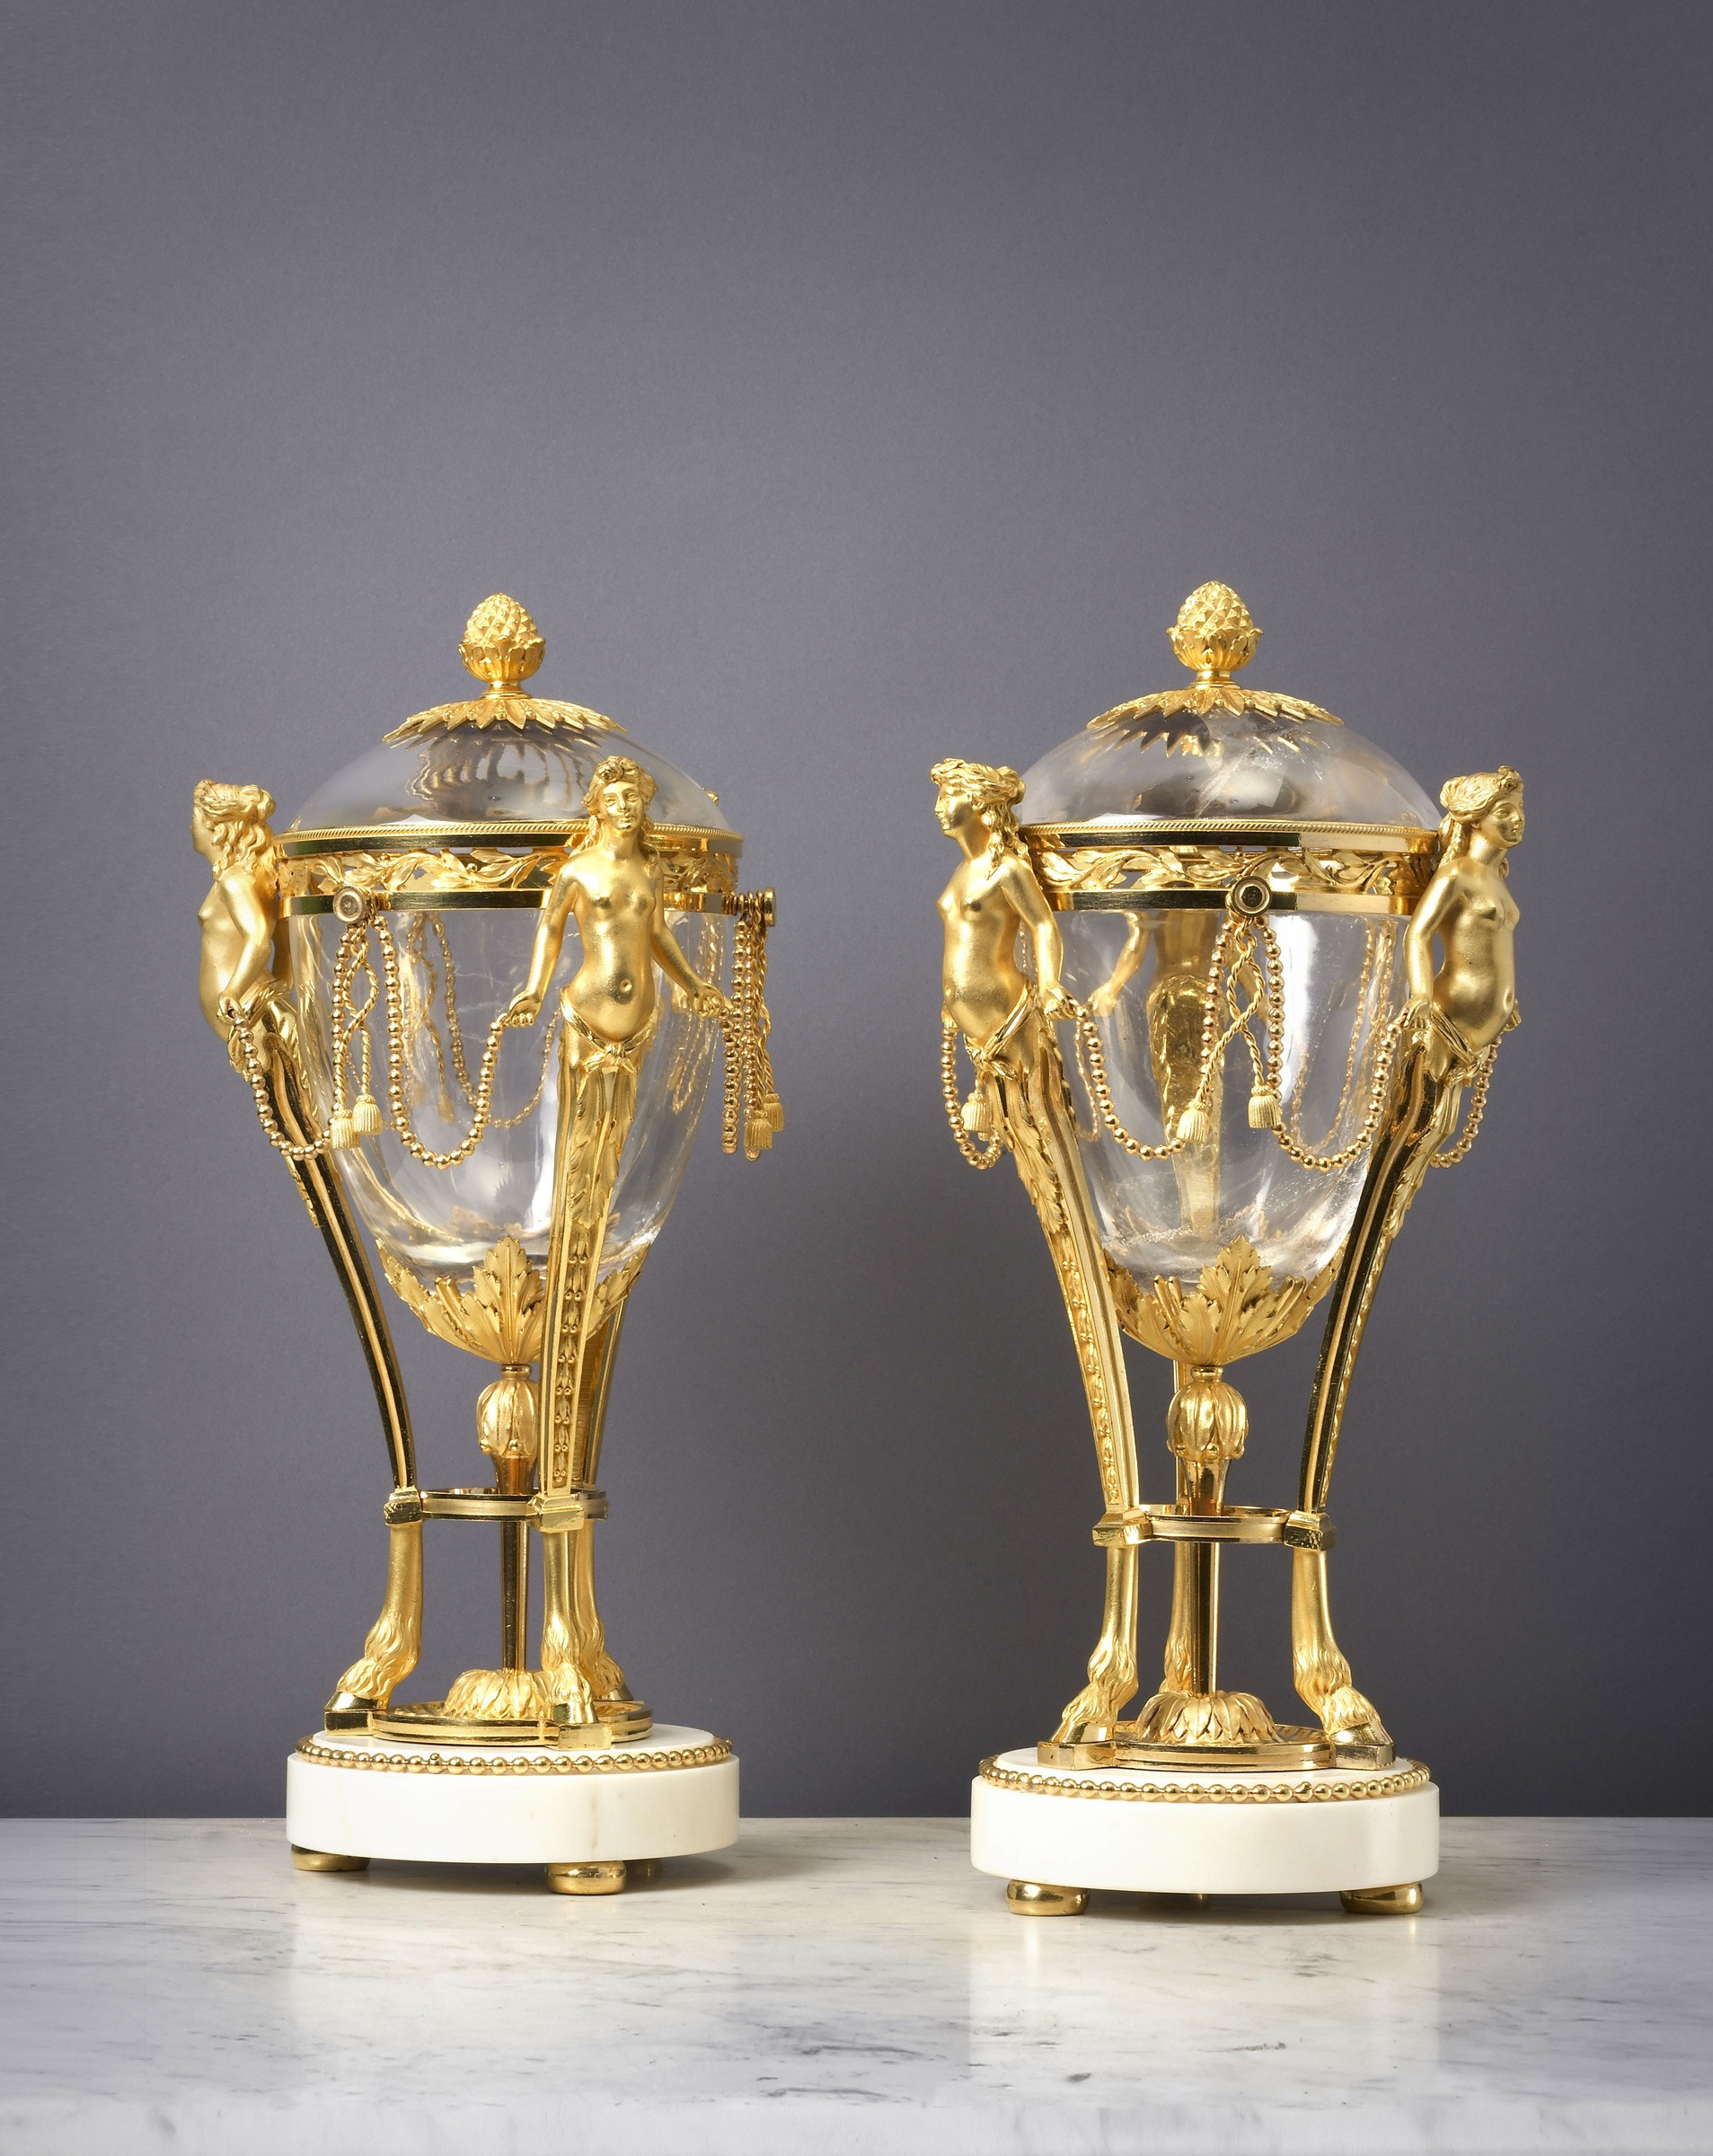 20 Fabulous White Faceted Vase 2024 free download white faceted vase of antoine philippe pajot attributed to a pair of louis xvi for a pair of louis xvi cassolettes attributed to antoine philippe pajot